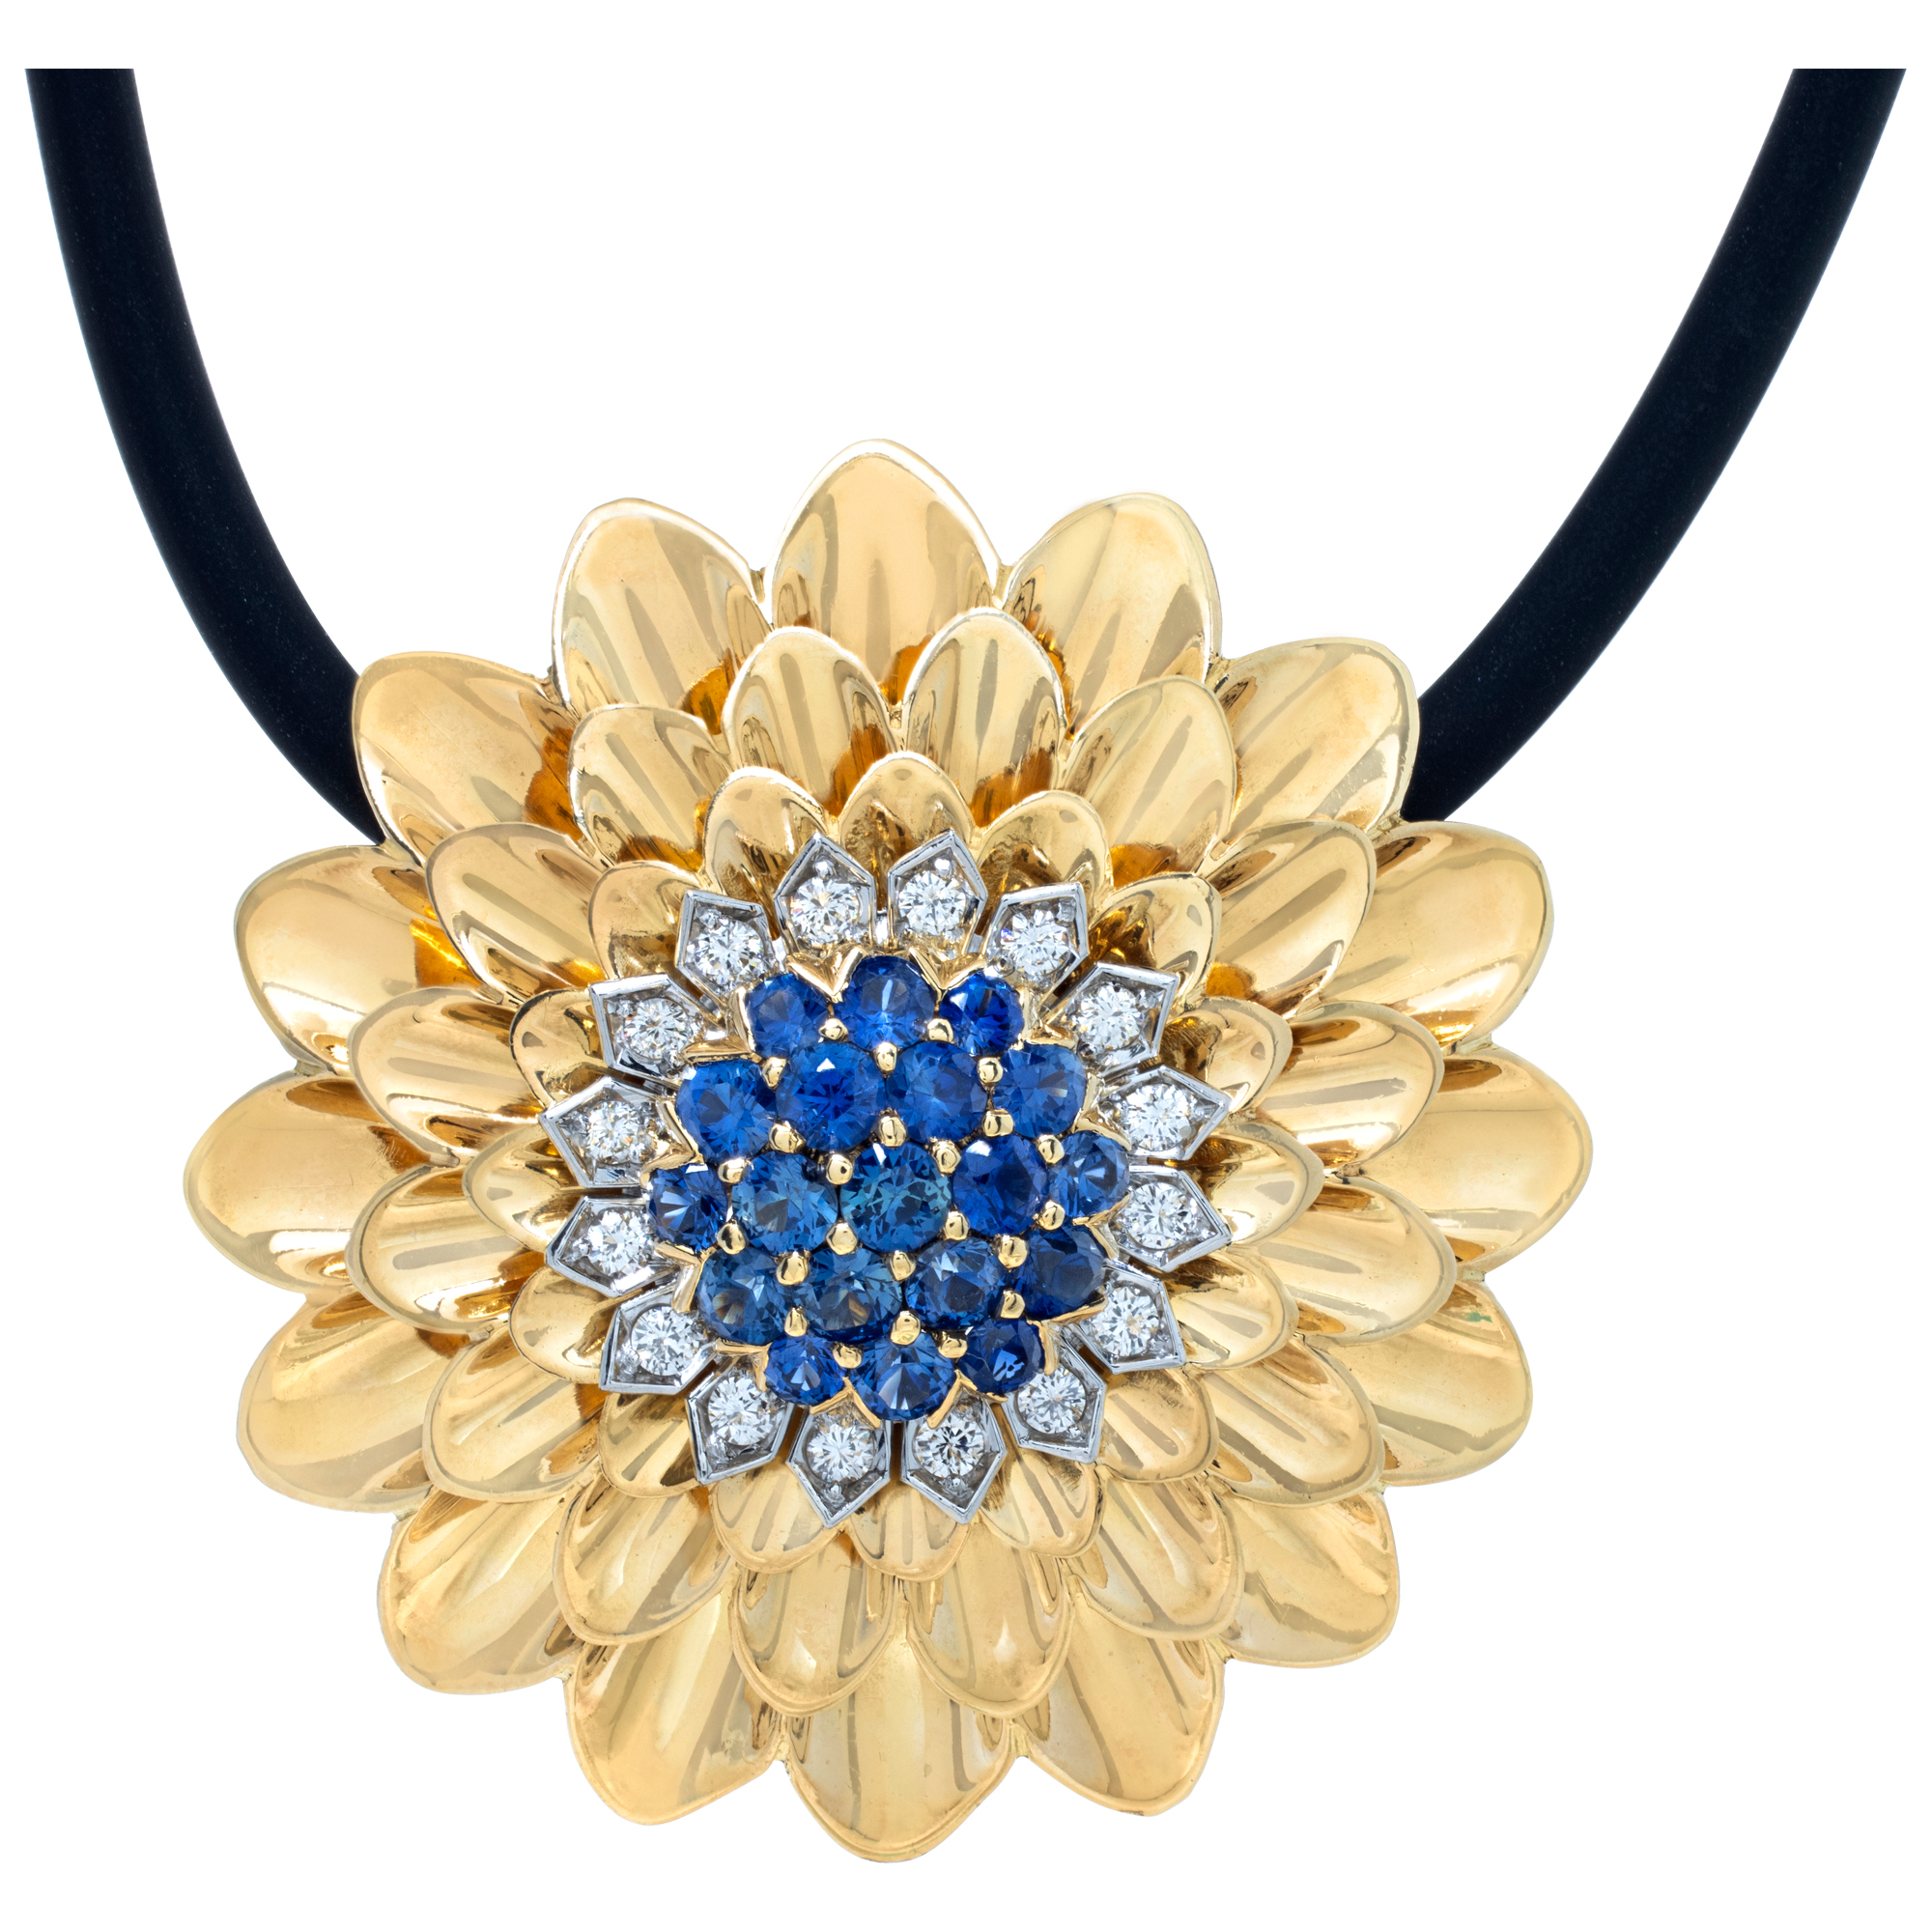 Antique diamond & sapphire "Sunburst" 18K yellow gold pendant on a rubber chocker with 18Kt yellow gold end-pieces